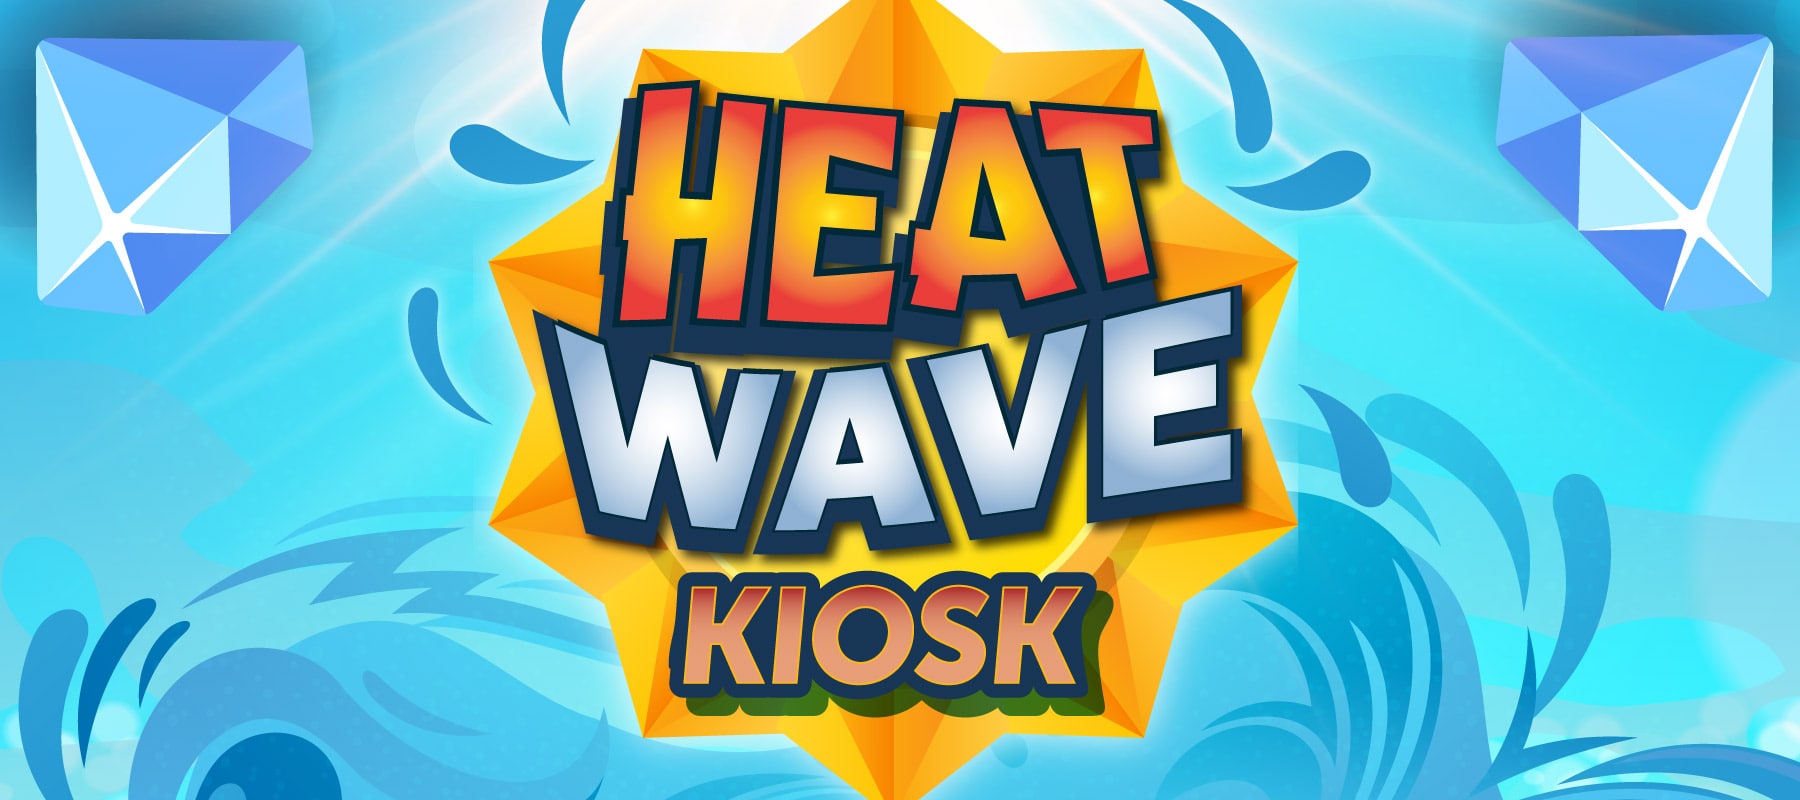 heat wave kiosk promotion at point place casino